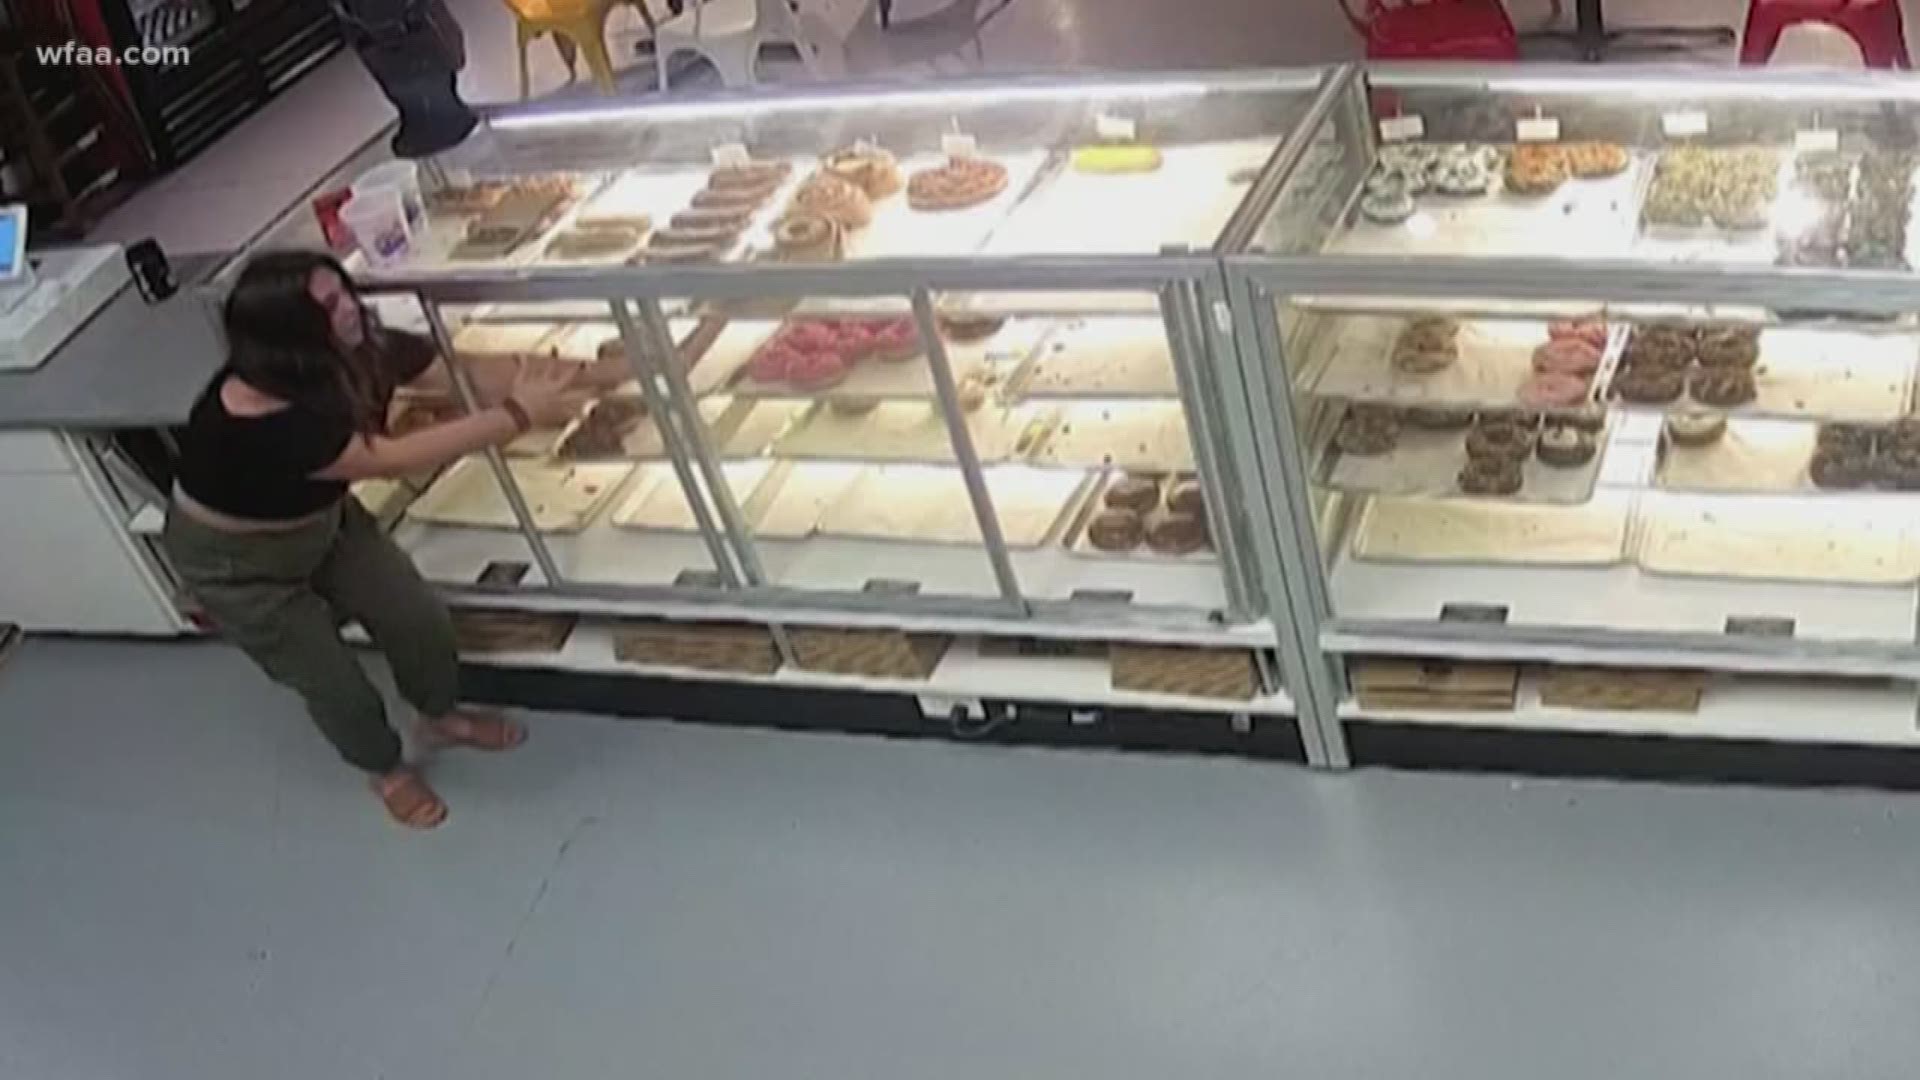 A woman was caught on camera stealing donuts from a shop in Fort Worth. The video, posted by Hurts Donut, has been viewed more than 100,000 times and promises a donut for best 'roast' comment.